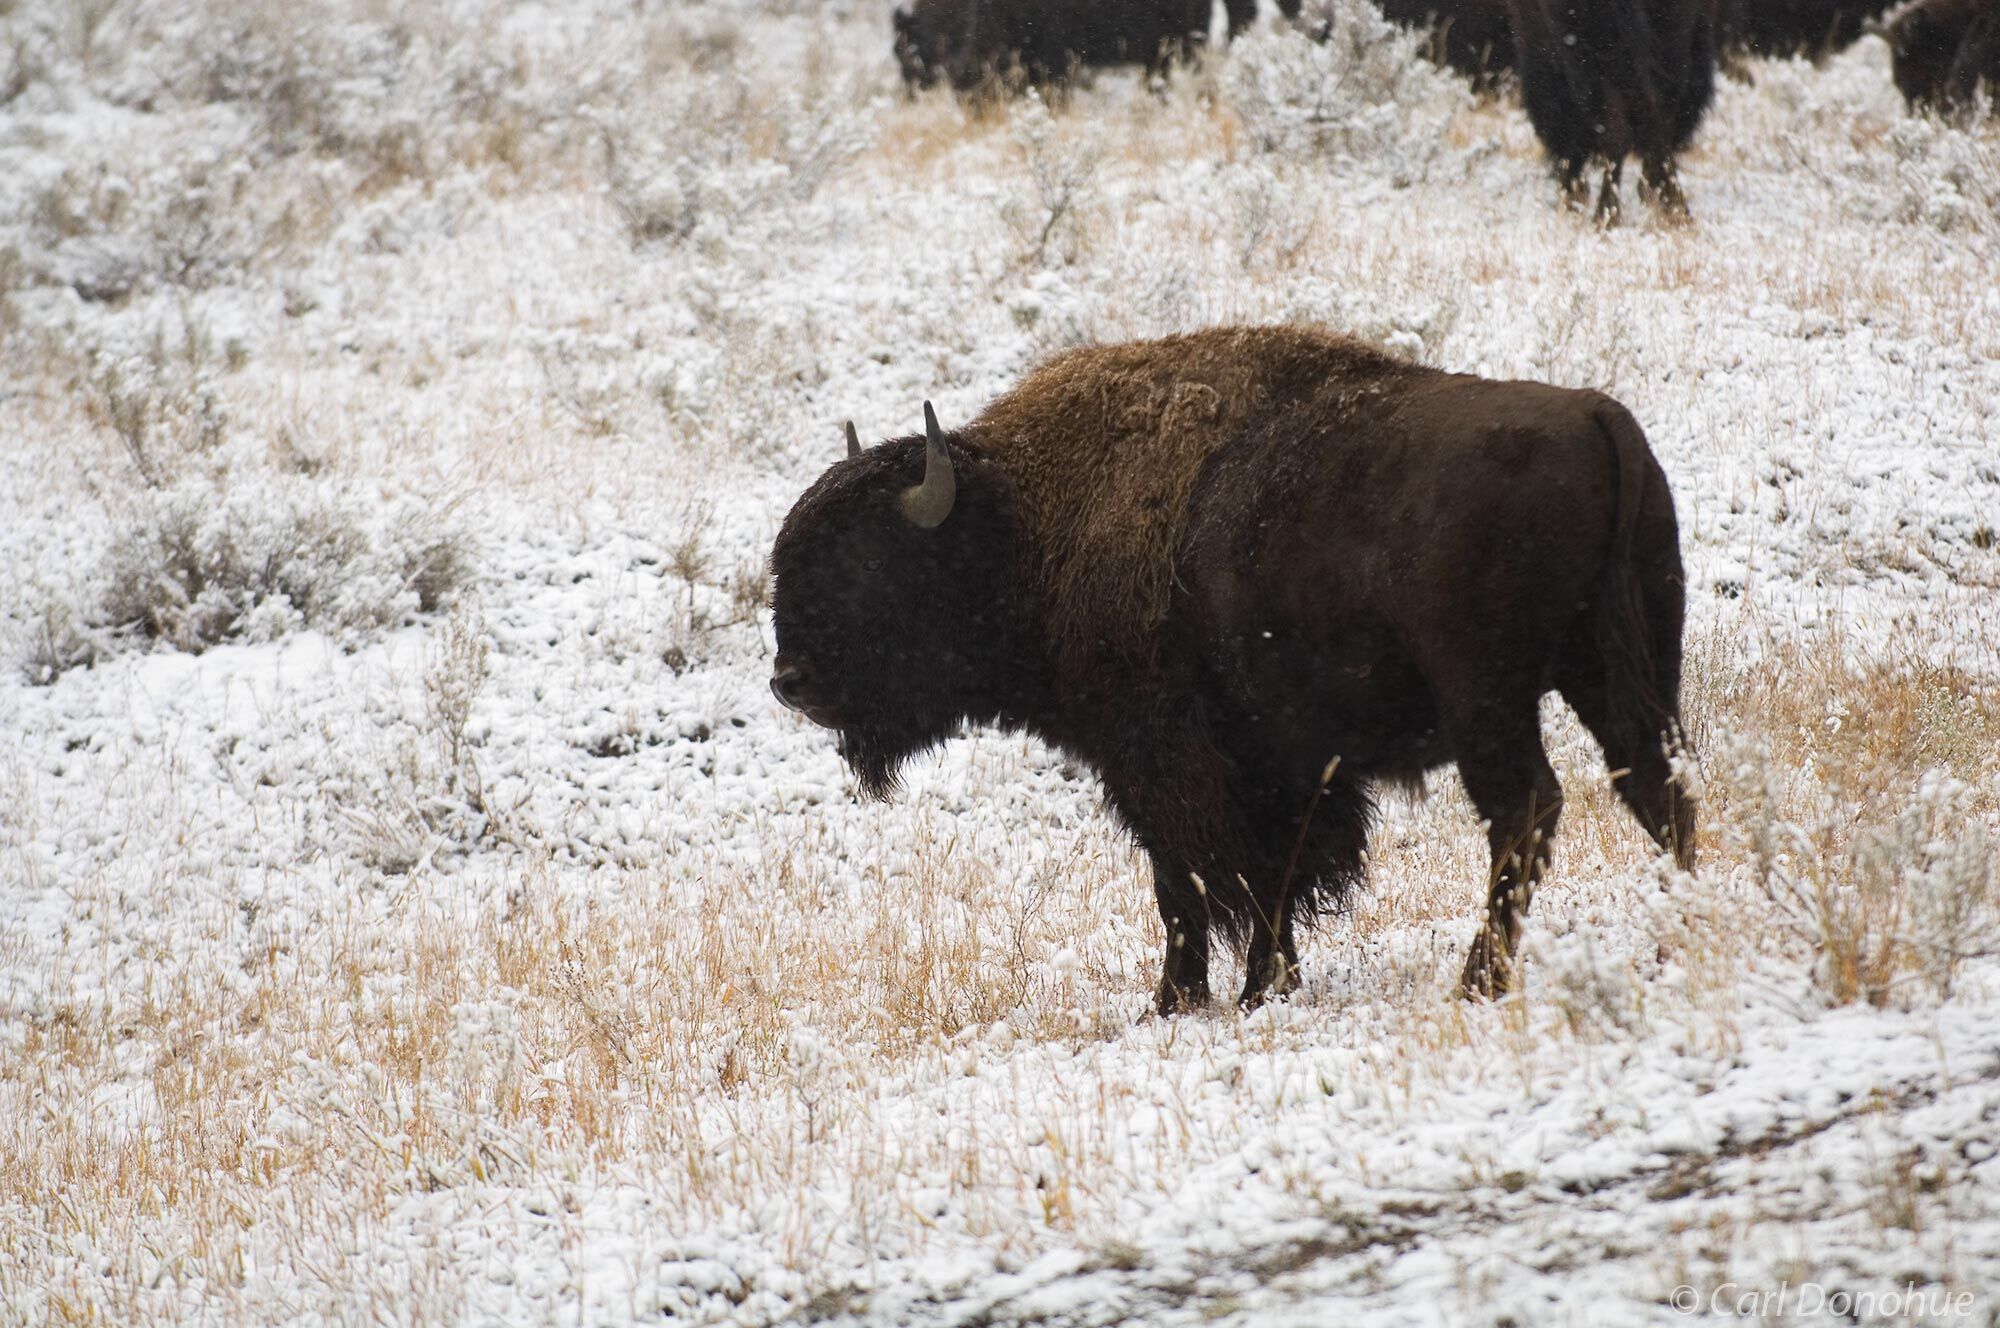 A bison standing in the snow on the prairie, with the forest in the background, Yellowstone National Park, Wyoming.